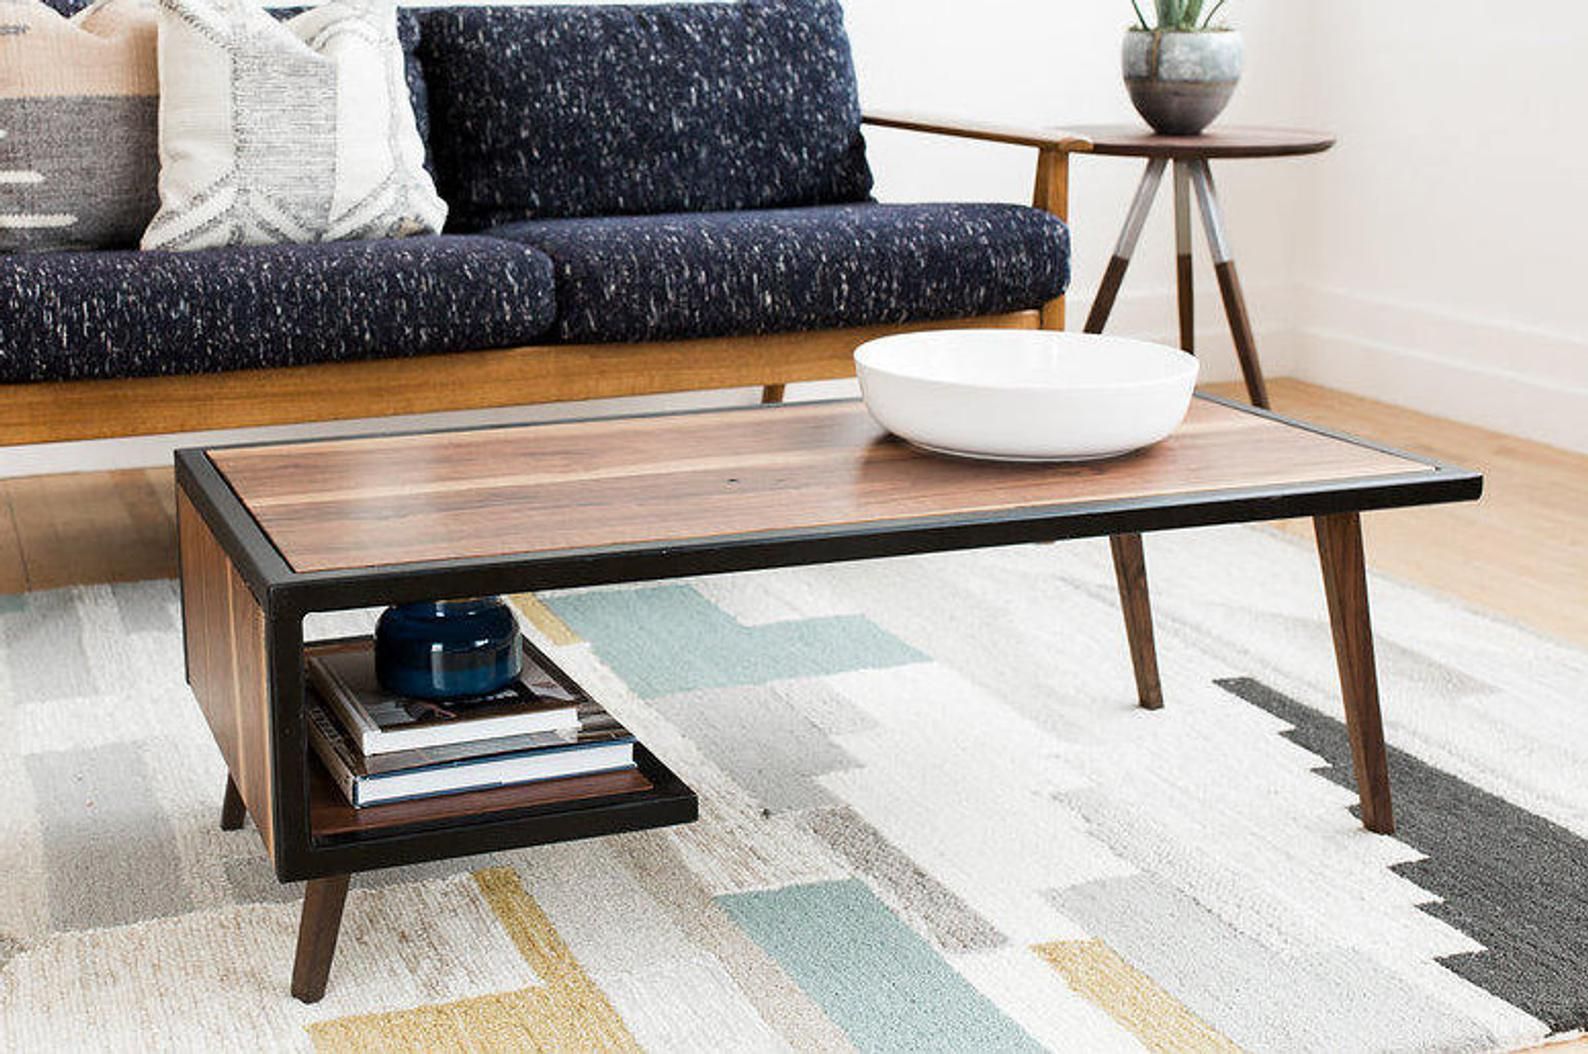 Mid Century Modern Style Coffee Tables You'll Love – Home Within Mid Century Coffee Tables (View 2 of 20)